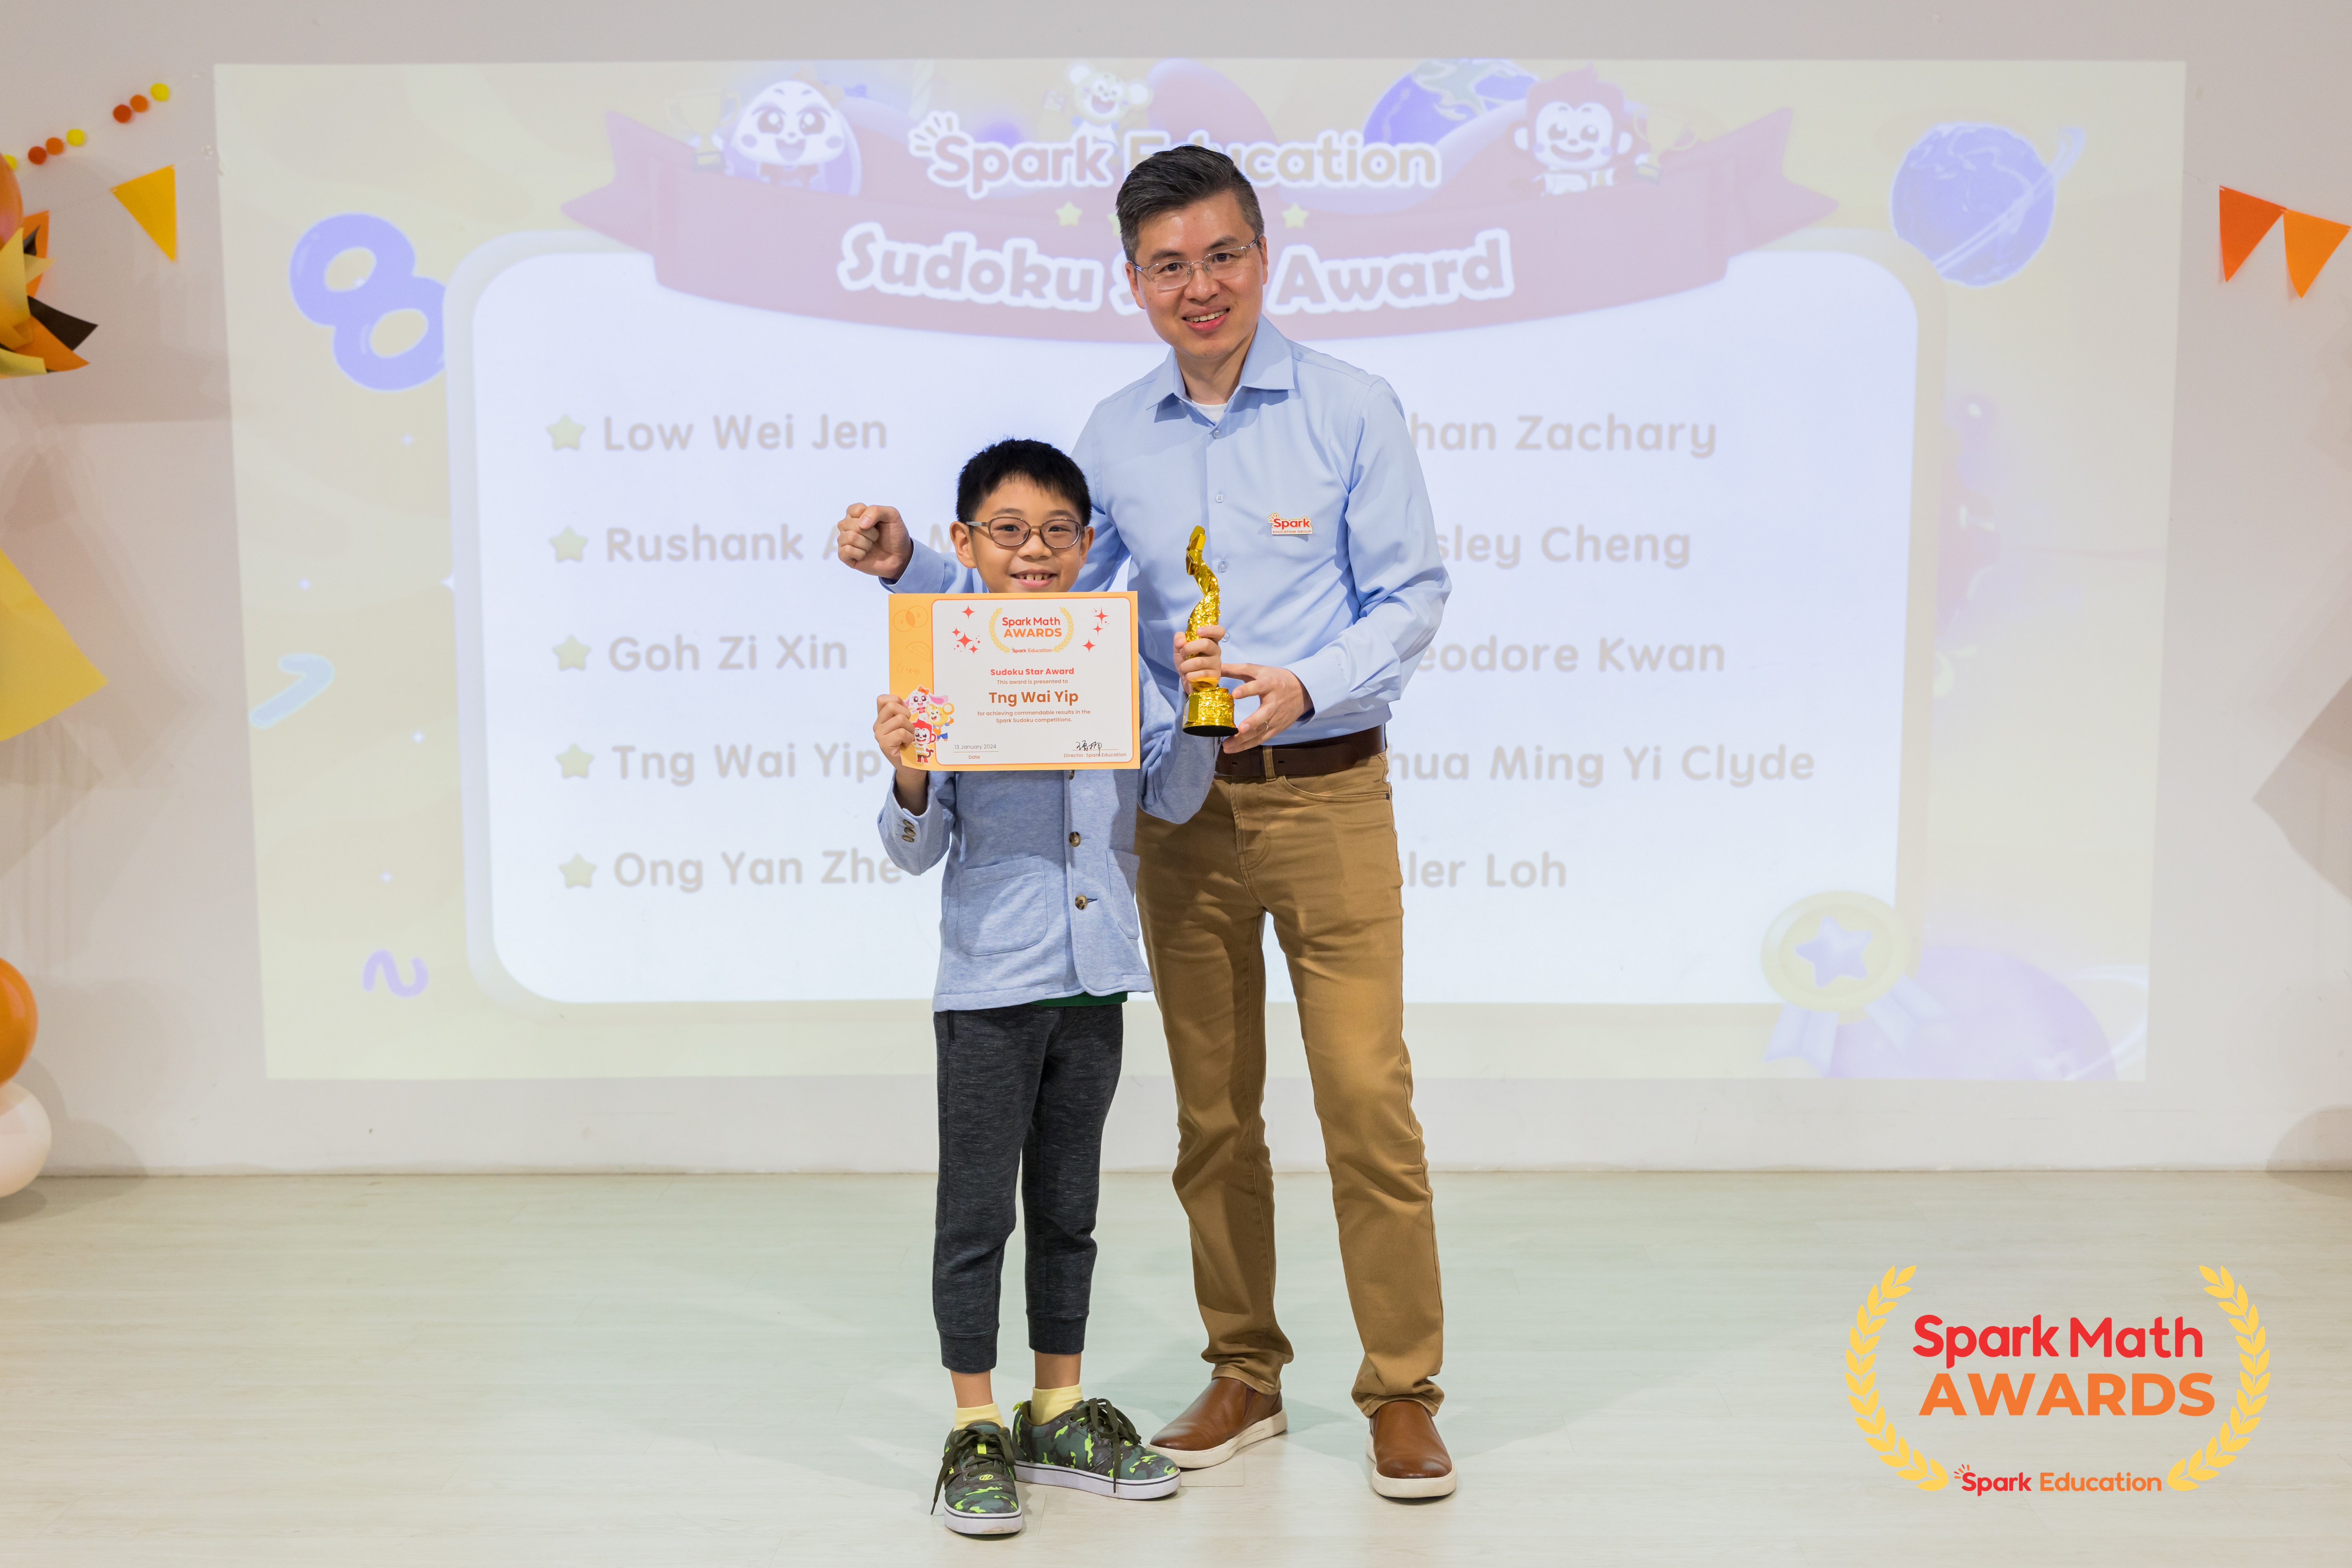 Mr. Xiaonan Wang, Co-founder and GM of Spark Education, presenting Sudoku Star awards to our top 10 Spark Math champs in various Spark Sudoku Cup competitions.